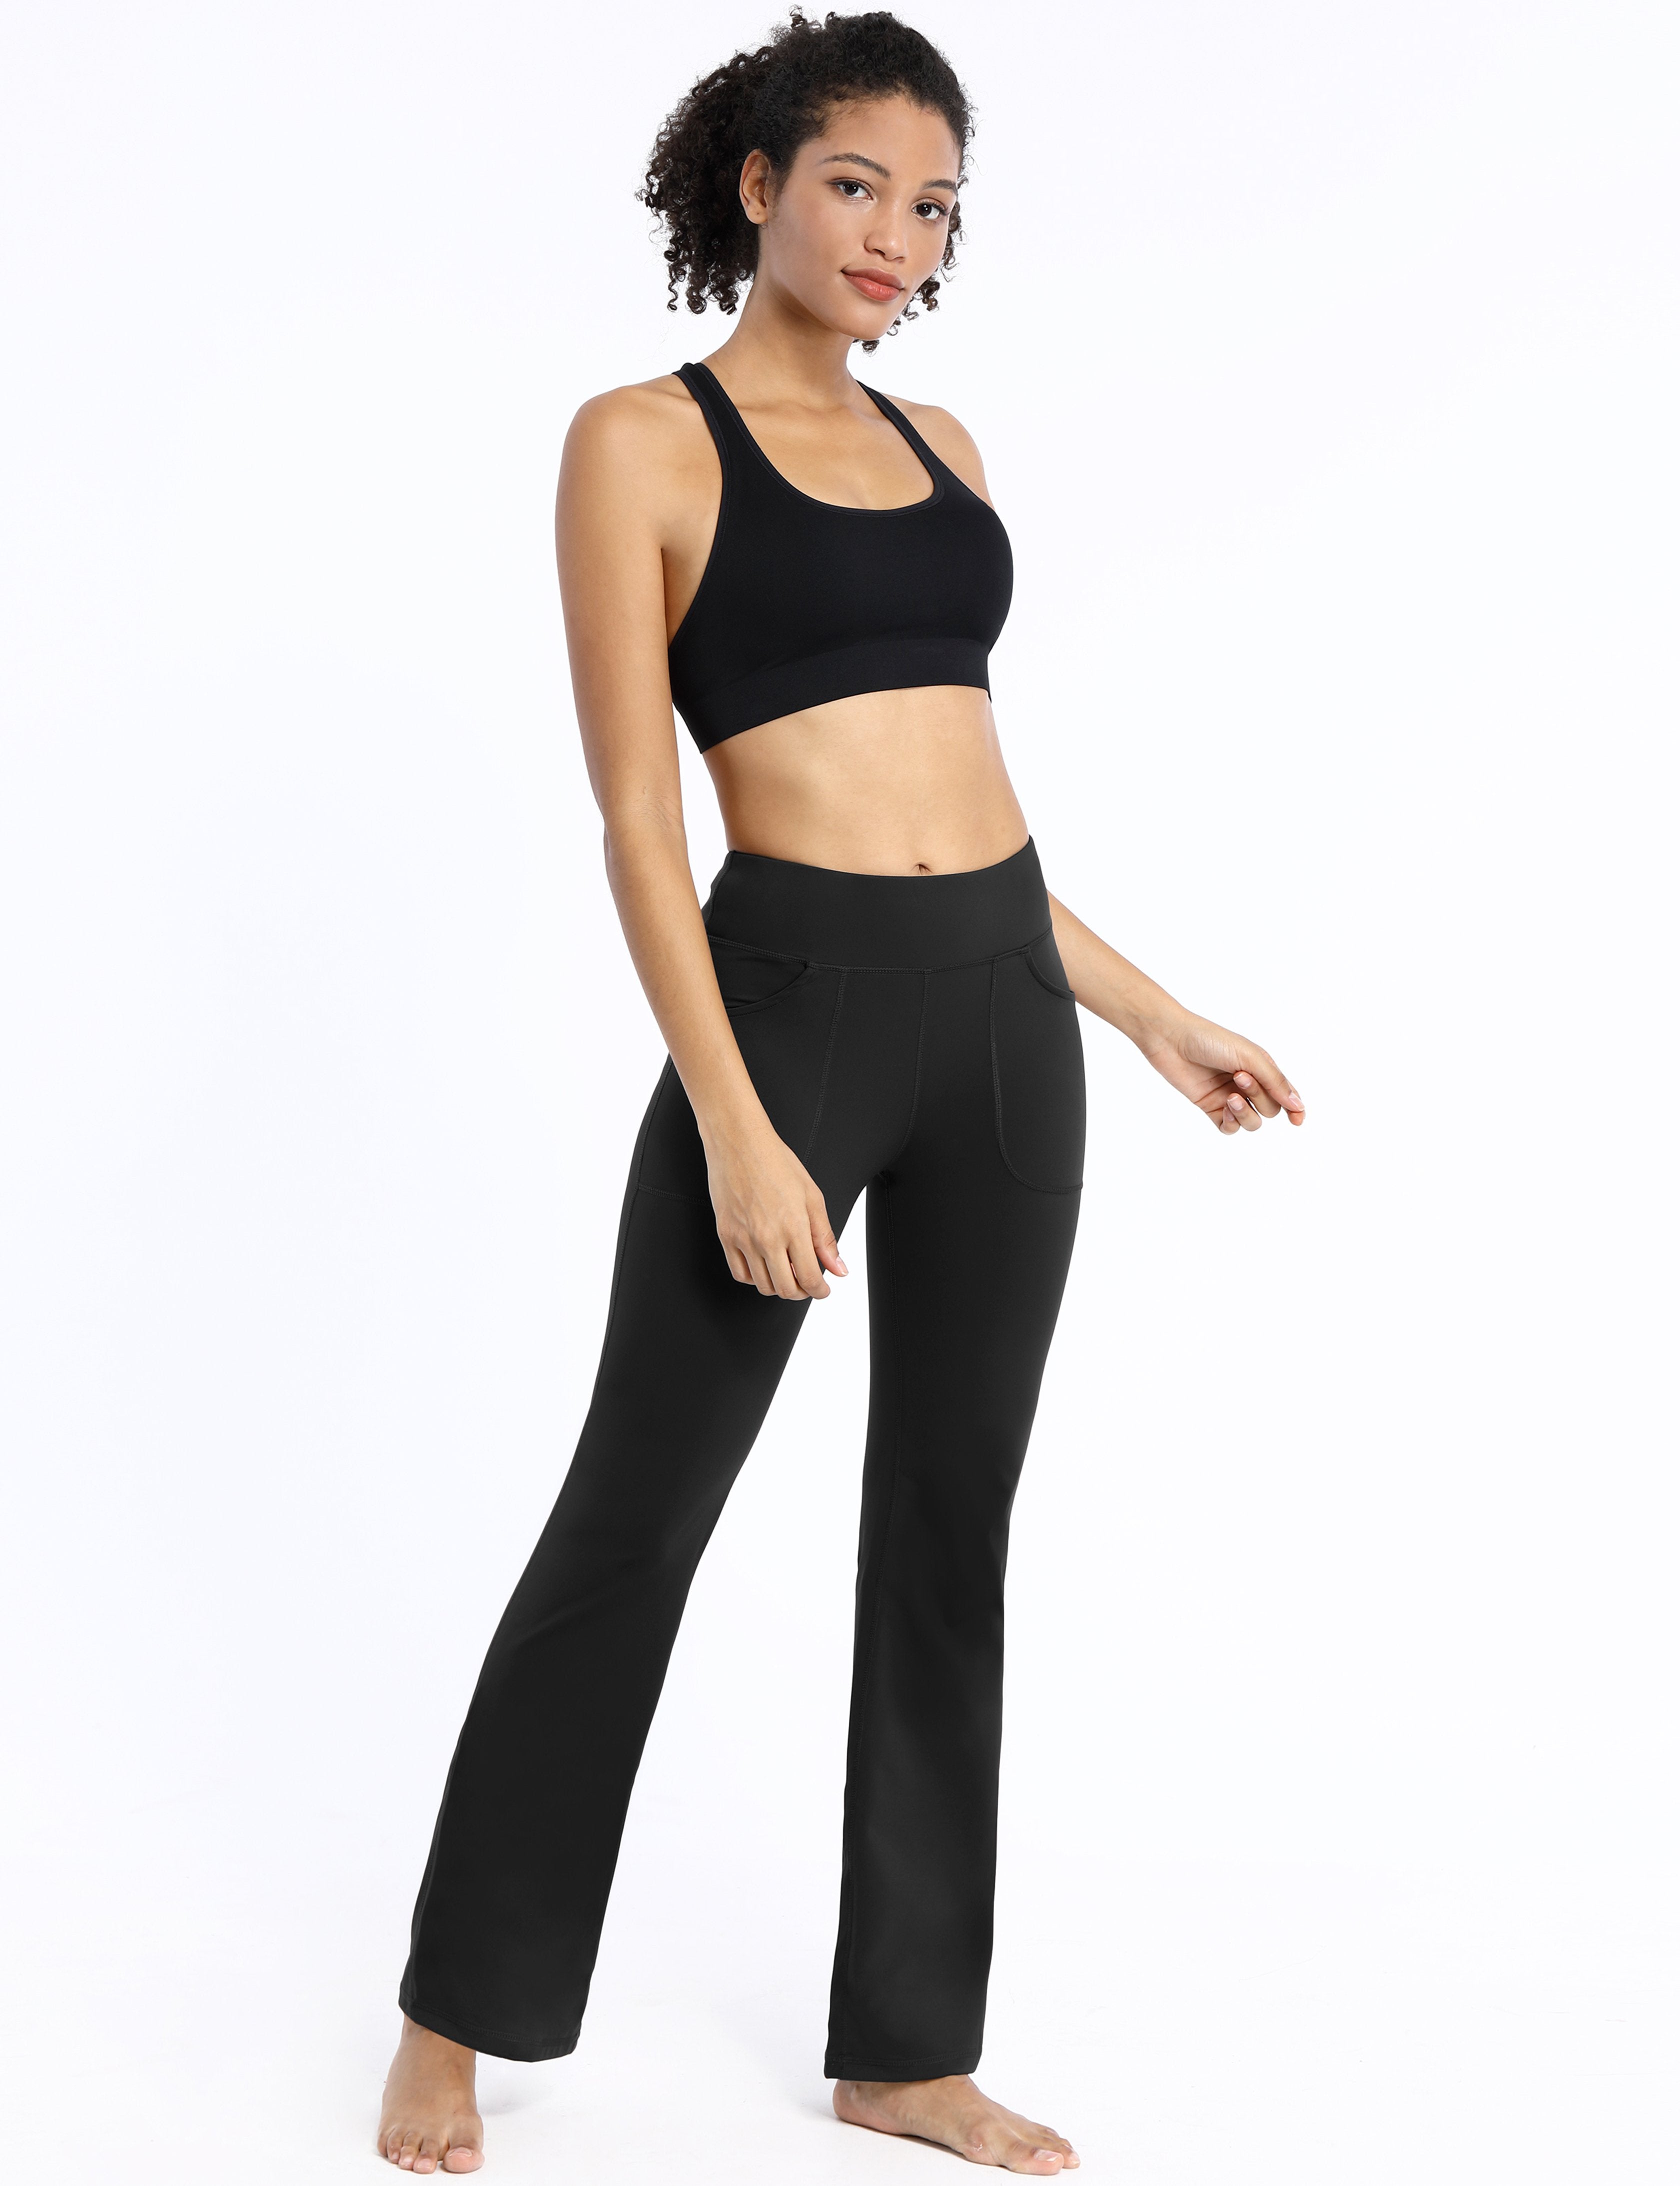 4 Pockets Bootcut Leggings black 75%Nylon/25%Spandex Fabric doesn't attract lint easily 4-way stretch No see-through Moisture-wicking Inner pocket Four lengths